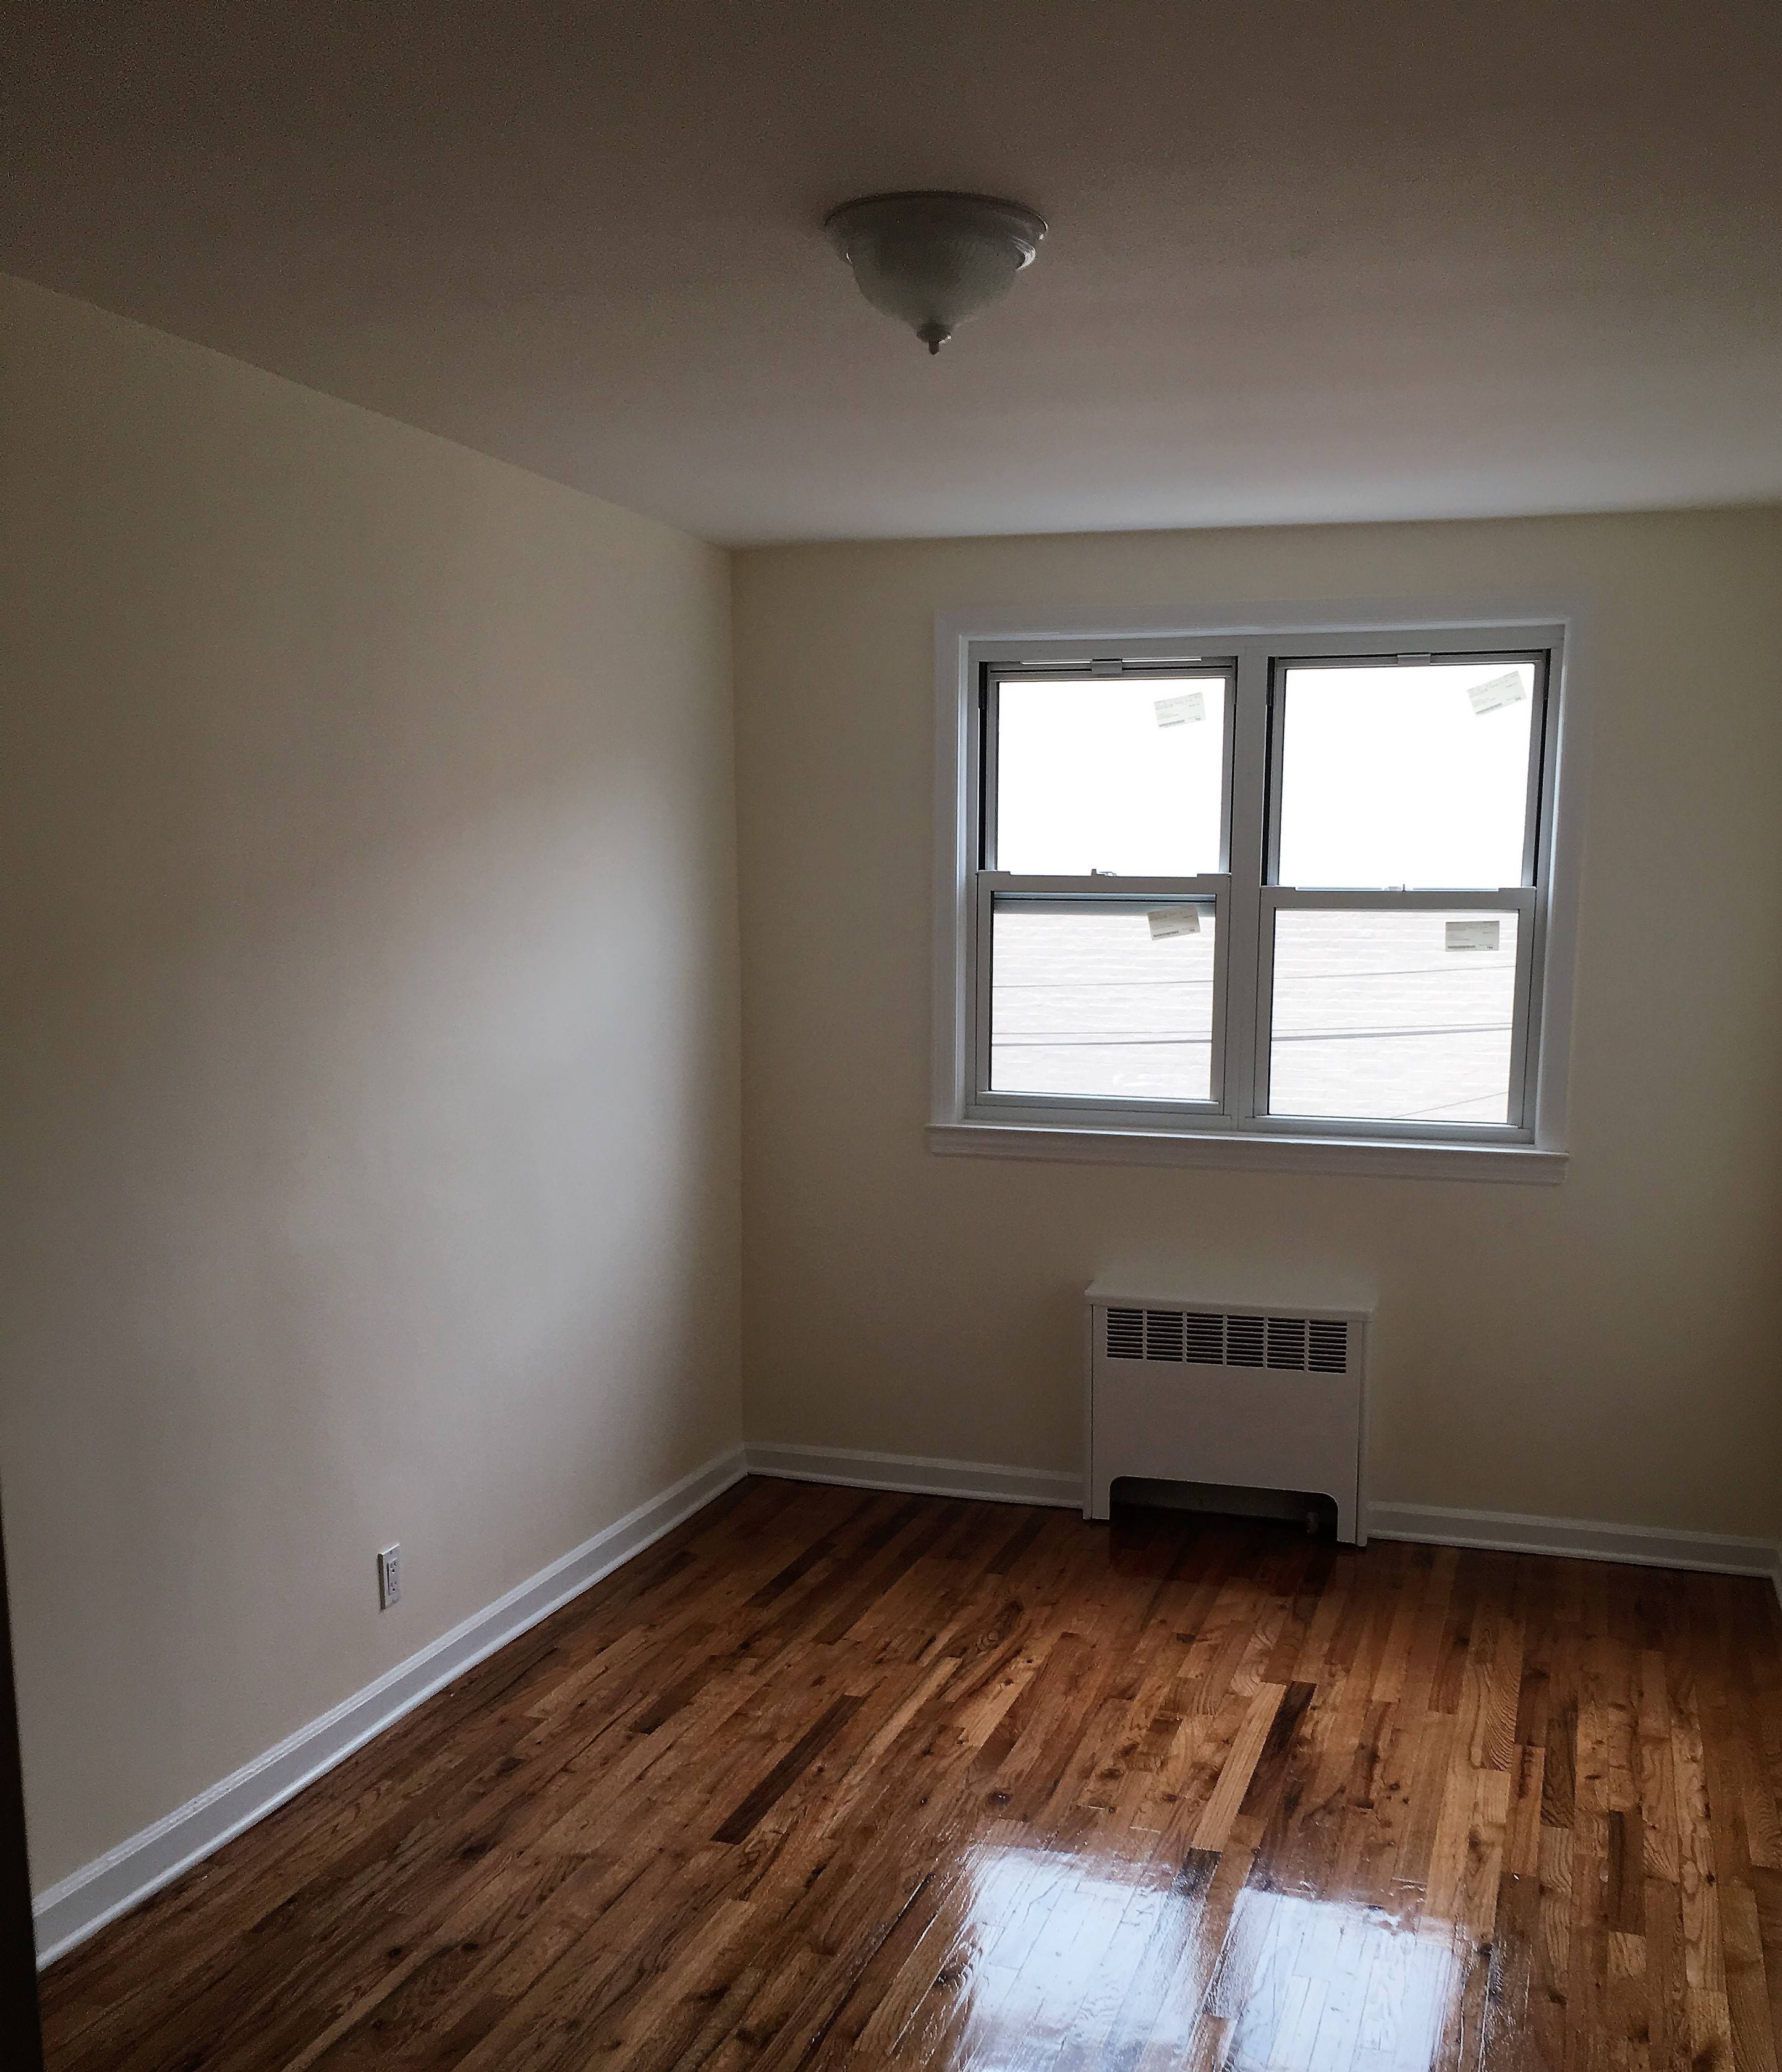 BRAND NEW 2 BEDROOM APARTMENT ALL UTILITIES INCLUDED (HEAT,GAS,ELECTRIC)